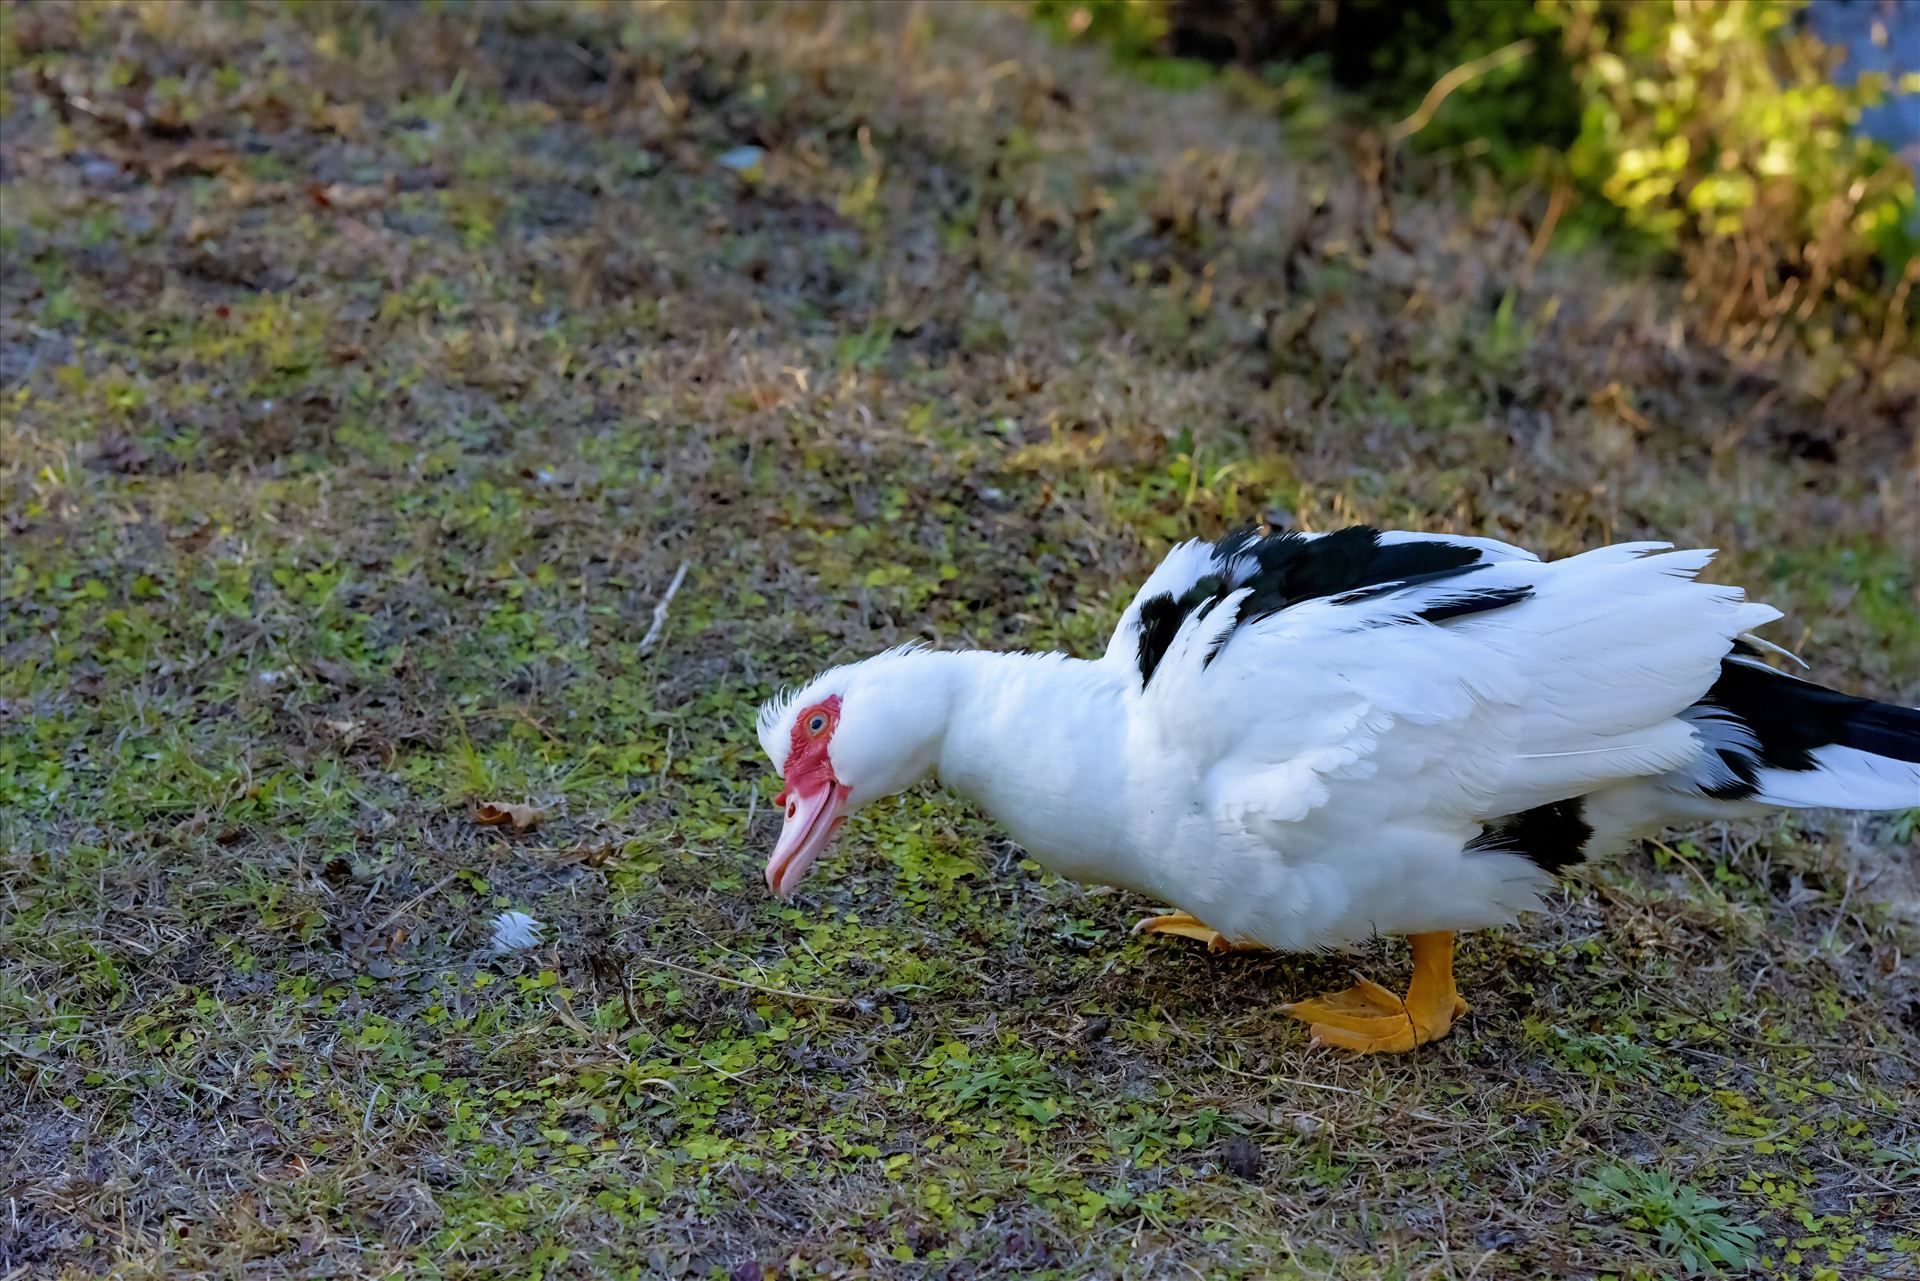 duck looking underneath a vehicle lake caroline alamy only 8106633.jpg  by Terry Kelly Photography